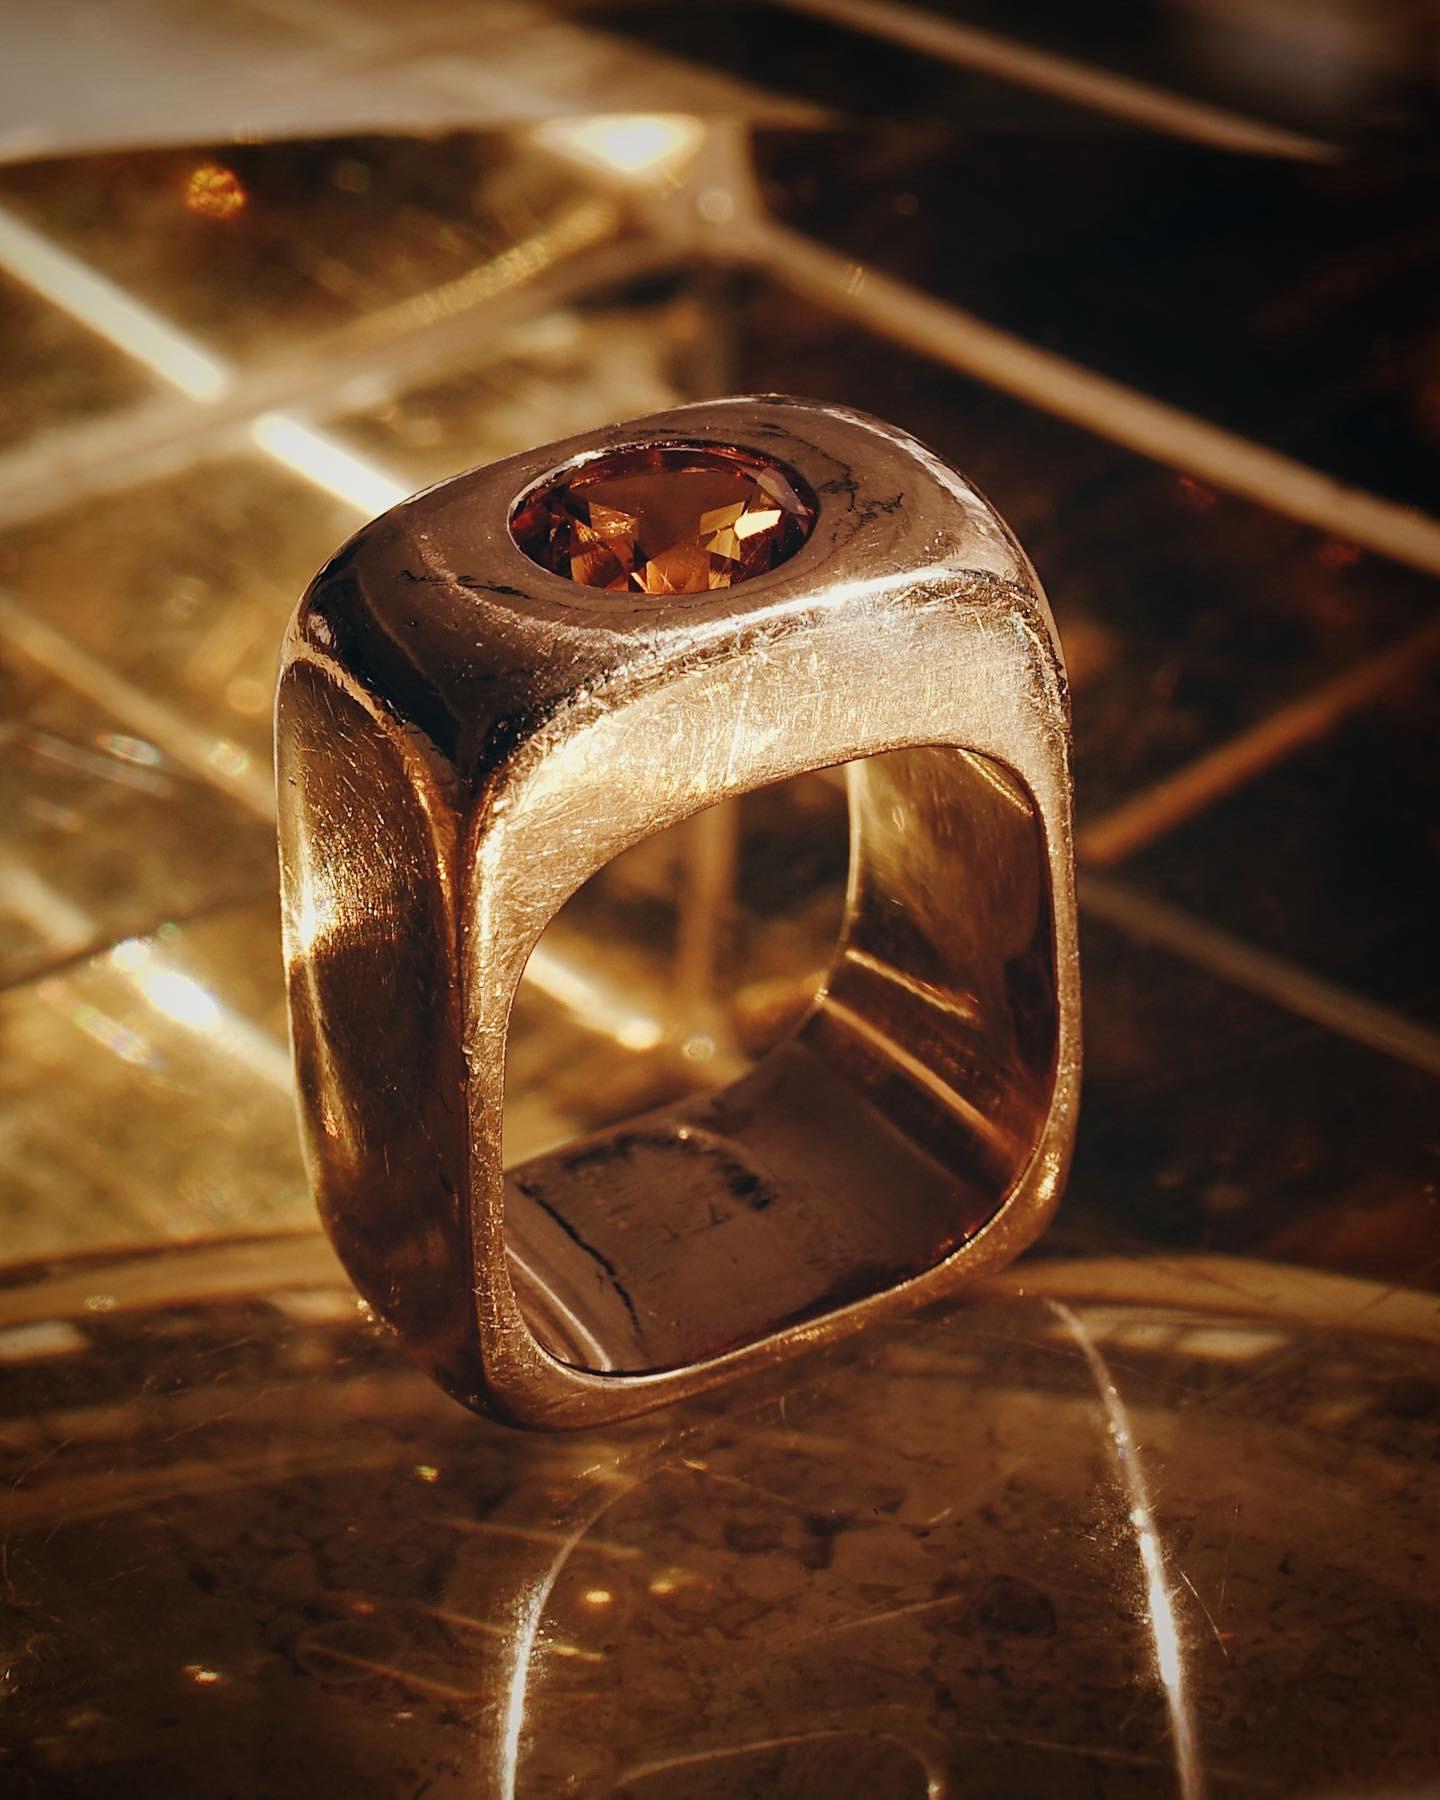 Jean Dinh Van (1927 - 2022)
18K Gold and Citrine ring, 1971, First Edition
Wears the Original Jean Dinh Van maker's mark, guarantee of the french master being the manufacturer of the ring.
Size 51 EU (US : 5 3/4) - Weight : 23.8 grams
Beautiful